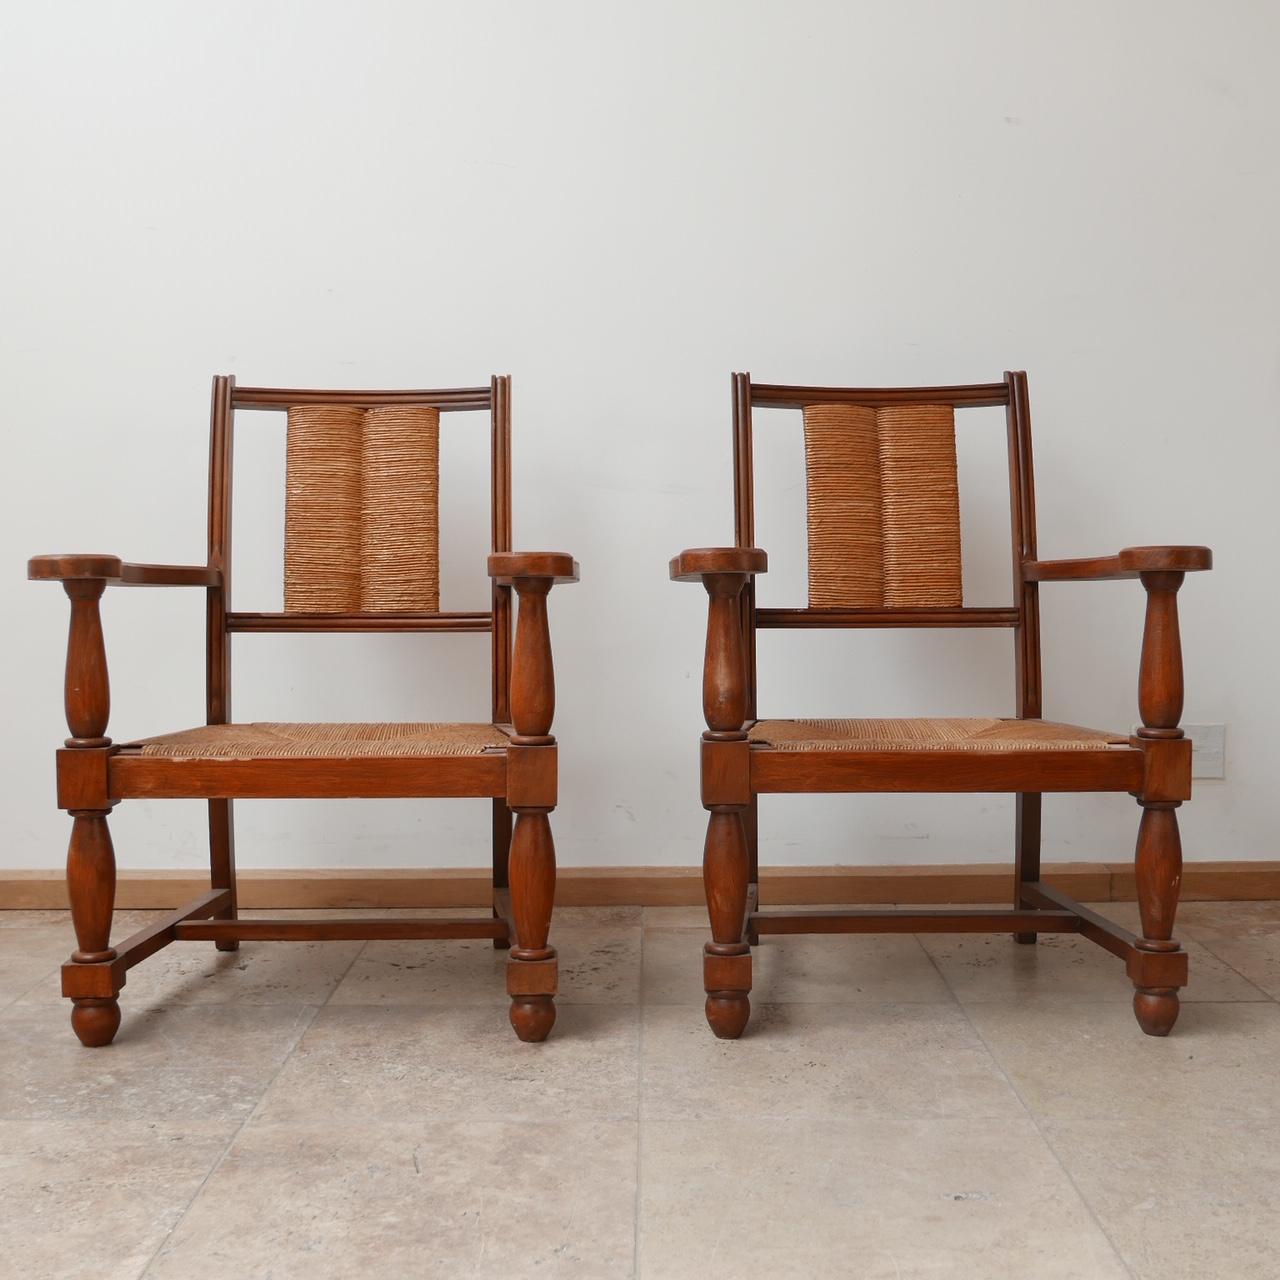 A pair of Neo Basque style armchairs. 

France, c1950s. 

Wooden frame with rush back rest and seats. 

Generally good condition, some wear commensurate with age.

Price is for the pair. 

Dimensions: 62 W x 46 D x 35 Seat Height x 83